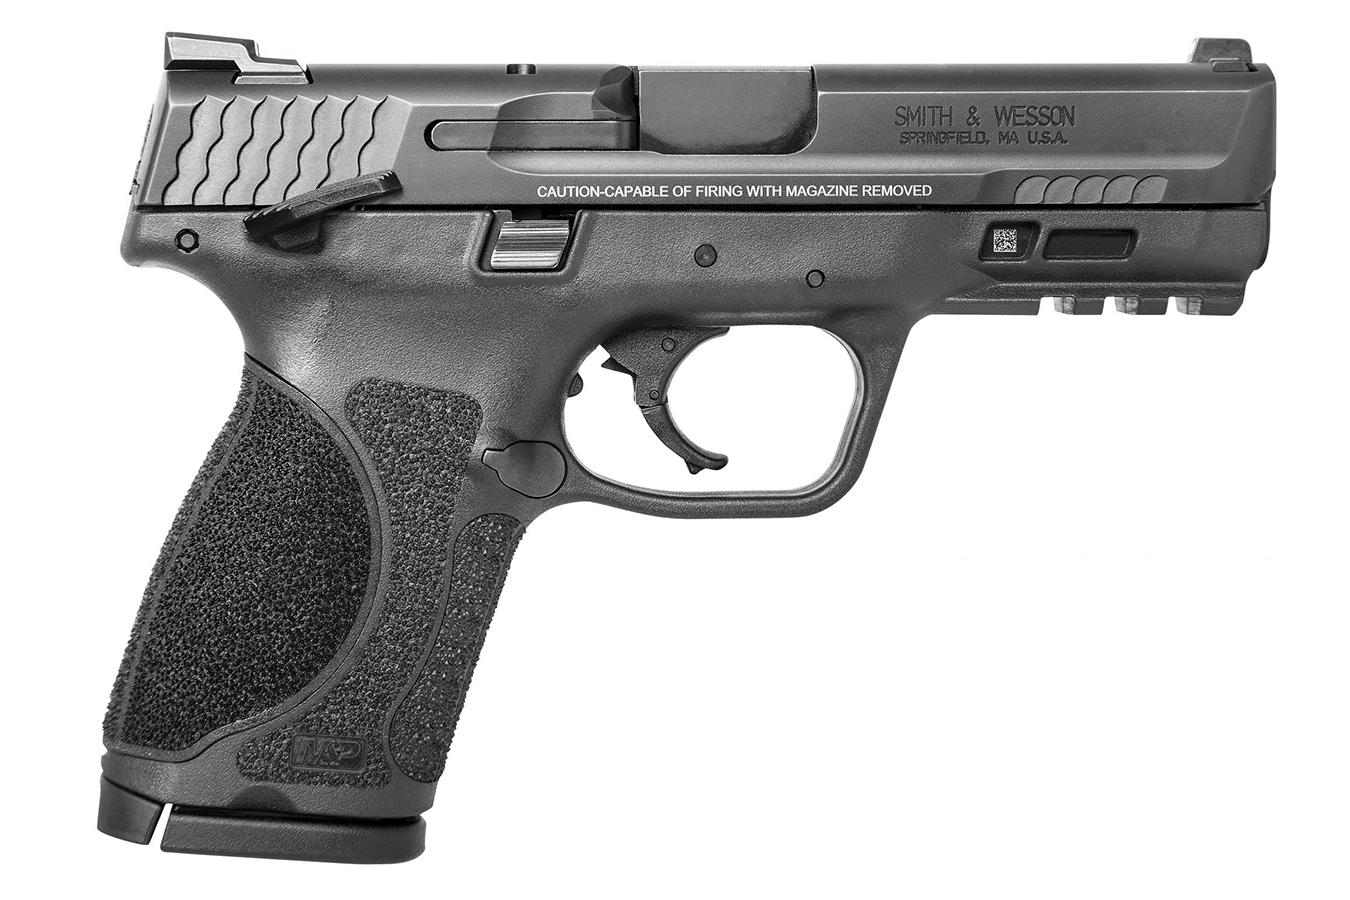 SMITH AND WESSON MP9 M2.0 COMPACT 9MM SEMI-AUTO PISTOL WITH NIGHT SIGHTS AND THREE MAGAZINES (LE